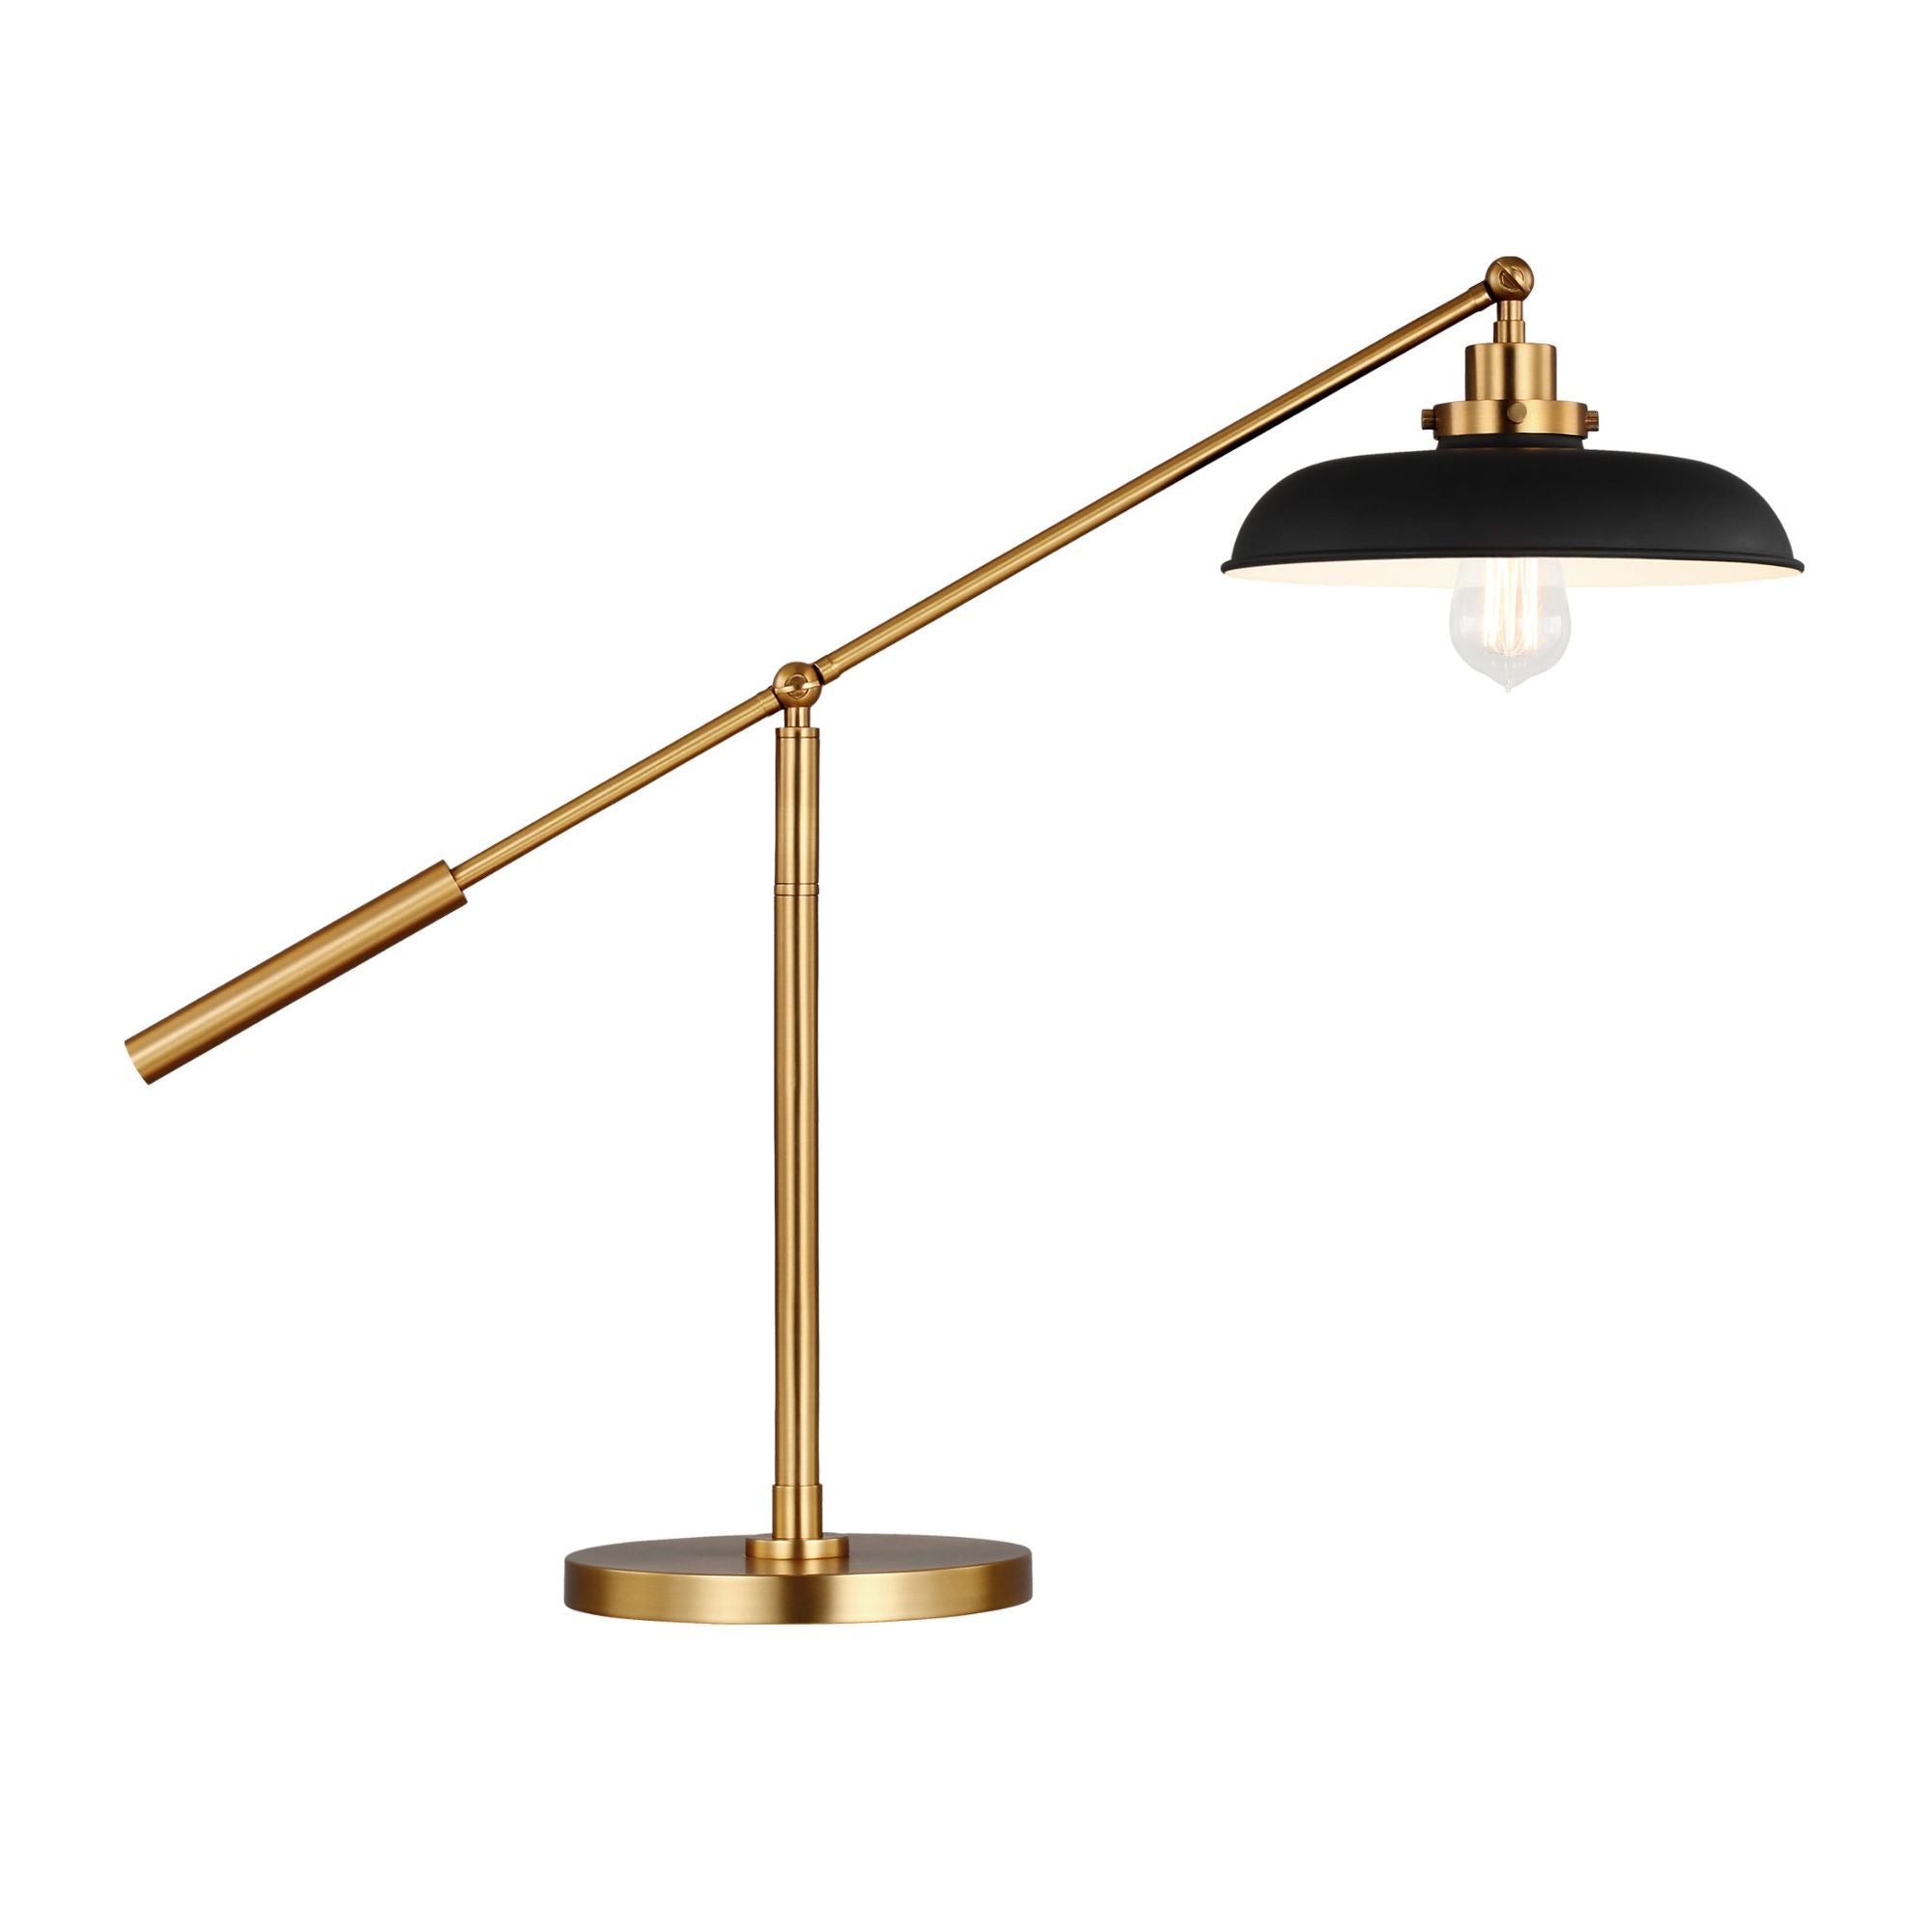 Chapman & Myers Wellfleet Wide Desk Lamp in Midnight Black and Burnished Brass